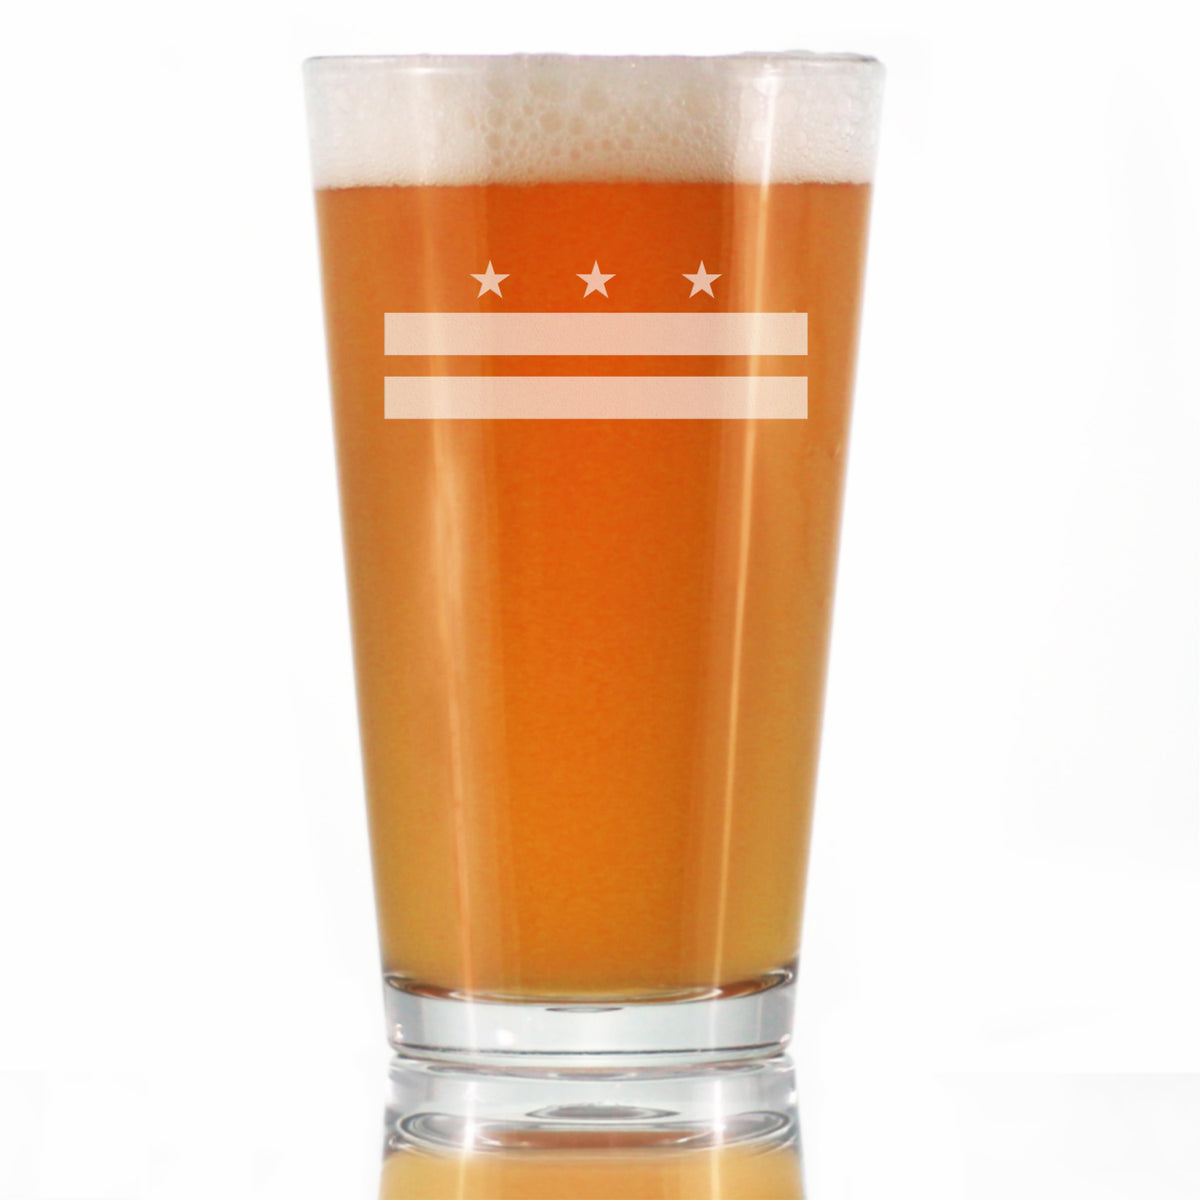 Washington DC Flag Pint Glass for Beer - State Themed Drinking Decor and Gifts for Washingtonian Women &amp; Men - 16 Oz Glasses